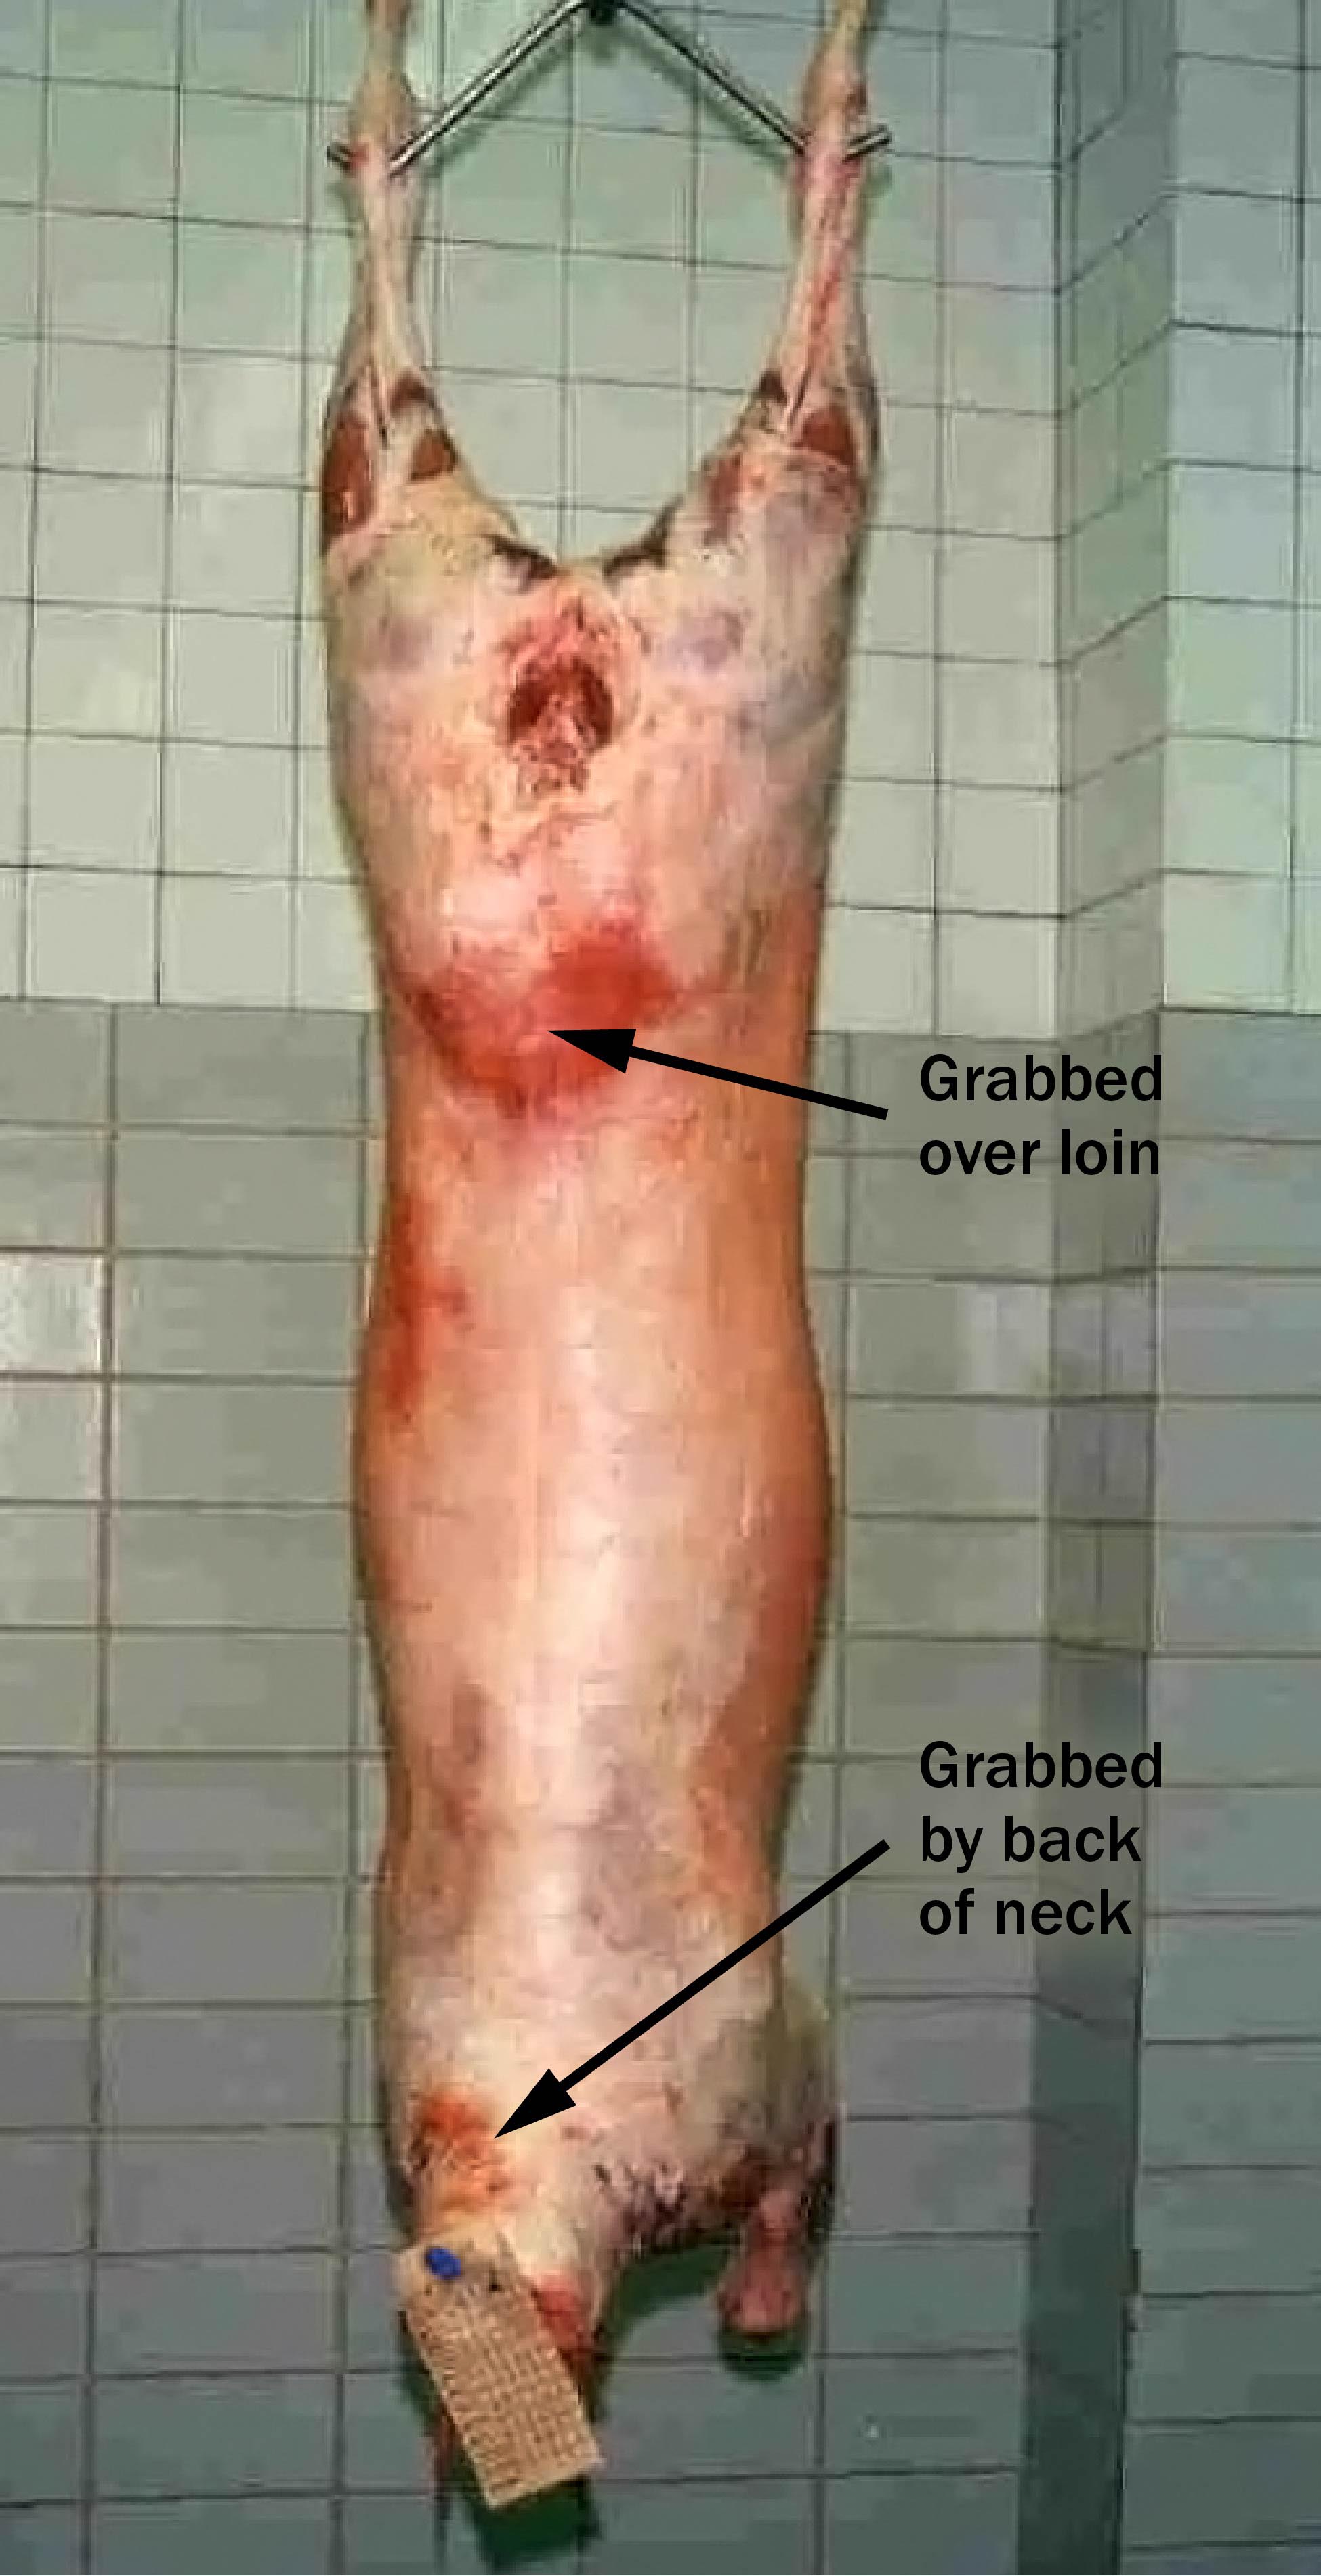 Lamb carcass hanging by its back feet without wool. Two large red-purple spots are shown. An area over the loin has an arrow pointing to it saying “grabbed over loin” and a bruised area at the neck has an arrow pointing to the bruise saying “grabbed by back of neck.”